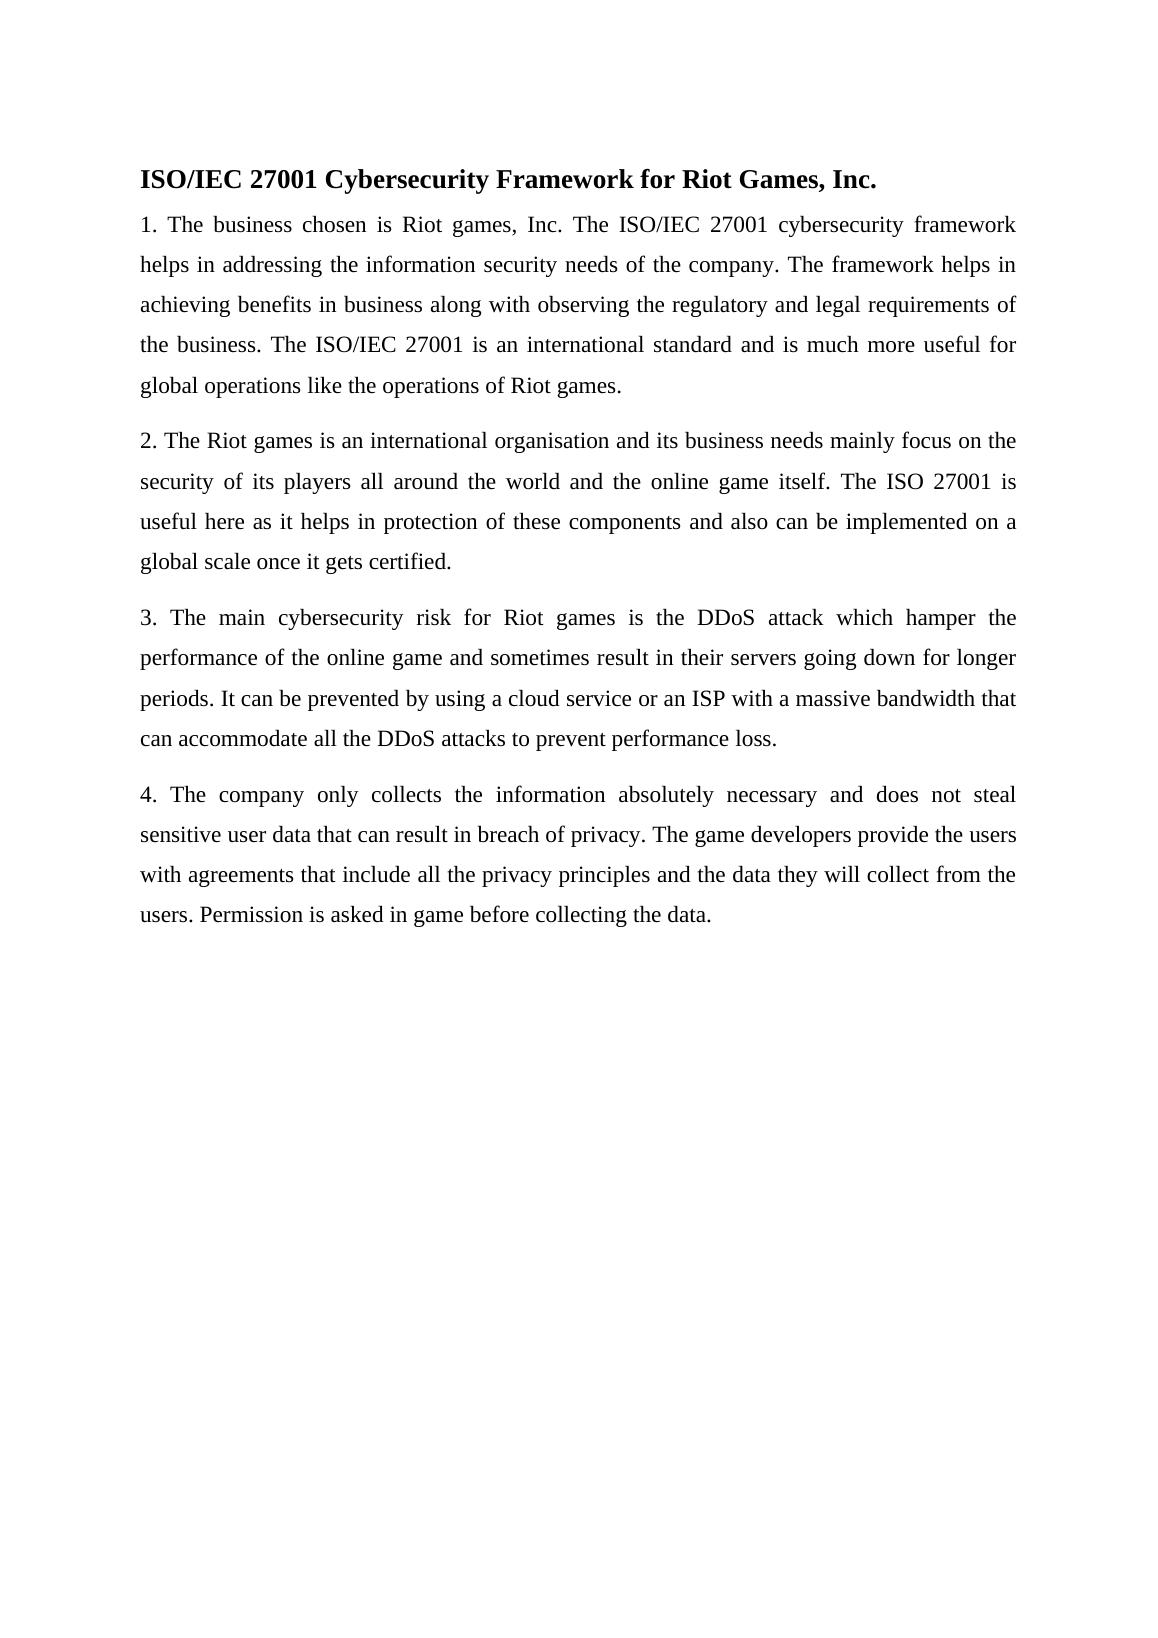 ISO/IEC 27001 Cybersecurity Framework for Riot Games, Inc. 1._1